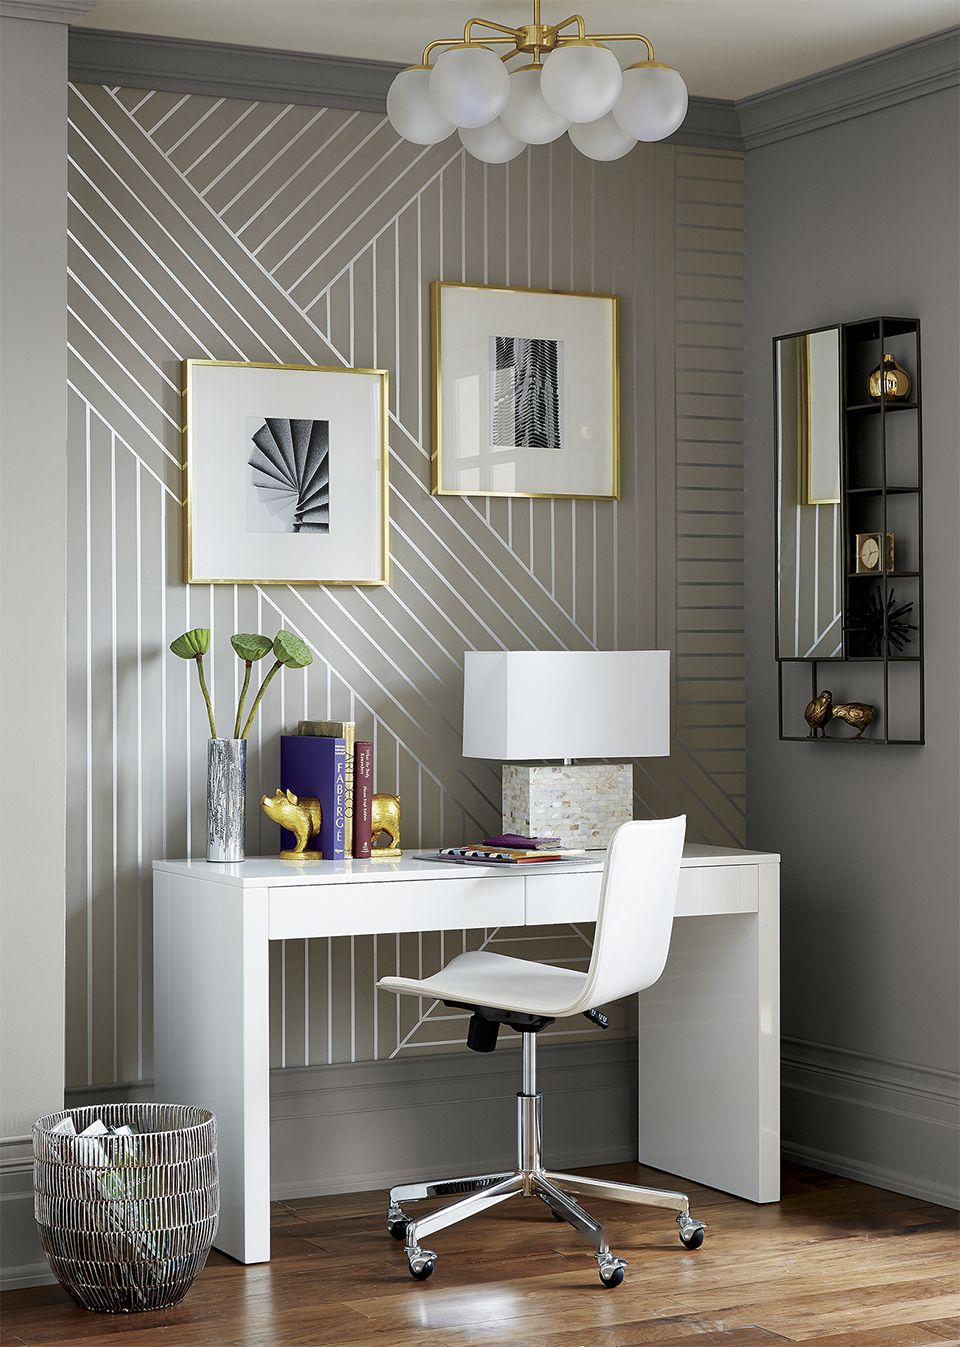 cb2 diy linear patterned create started inspiration check looking central